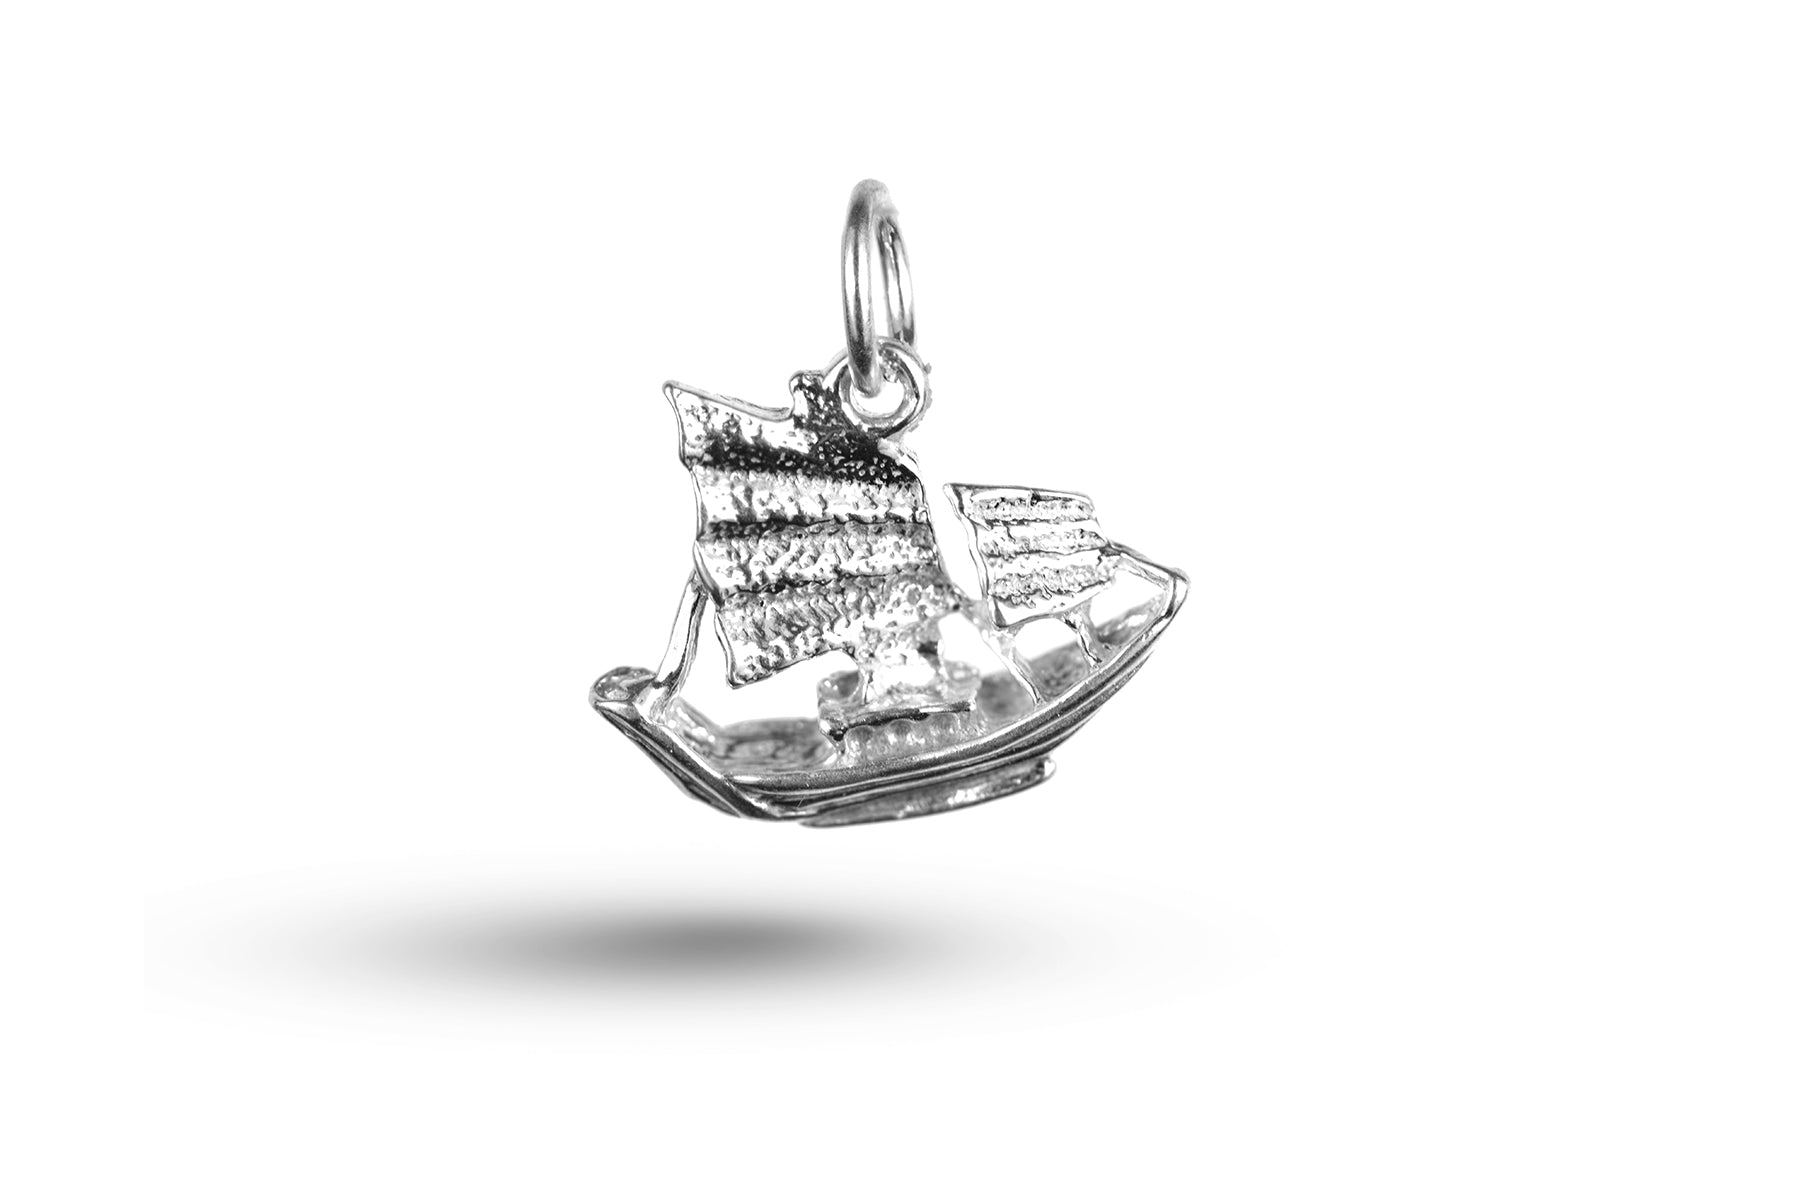 White gold Chinese Junk charm.